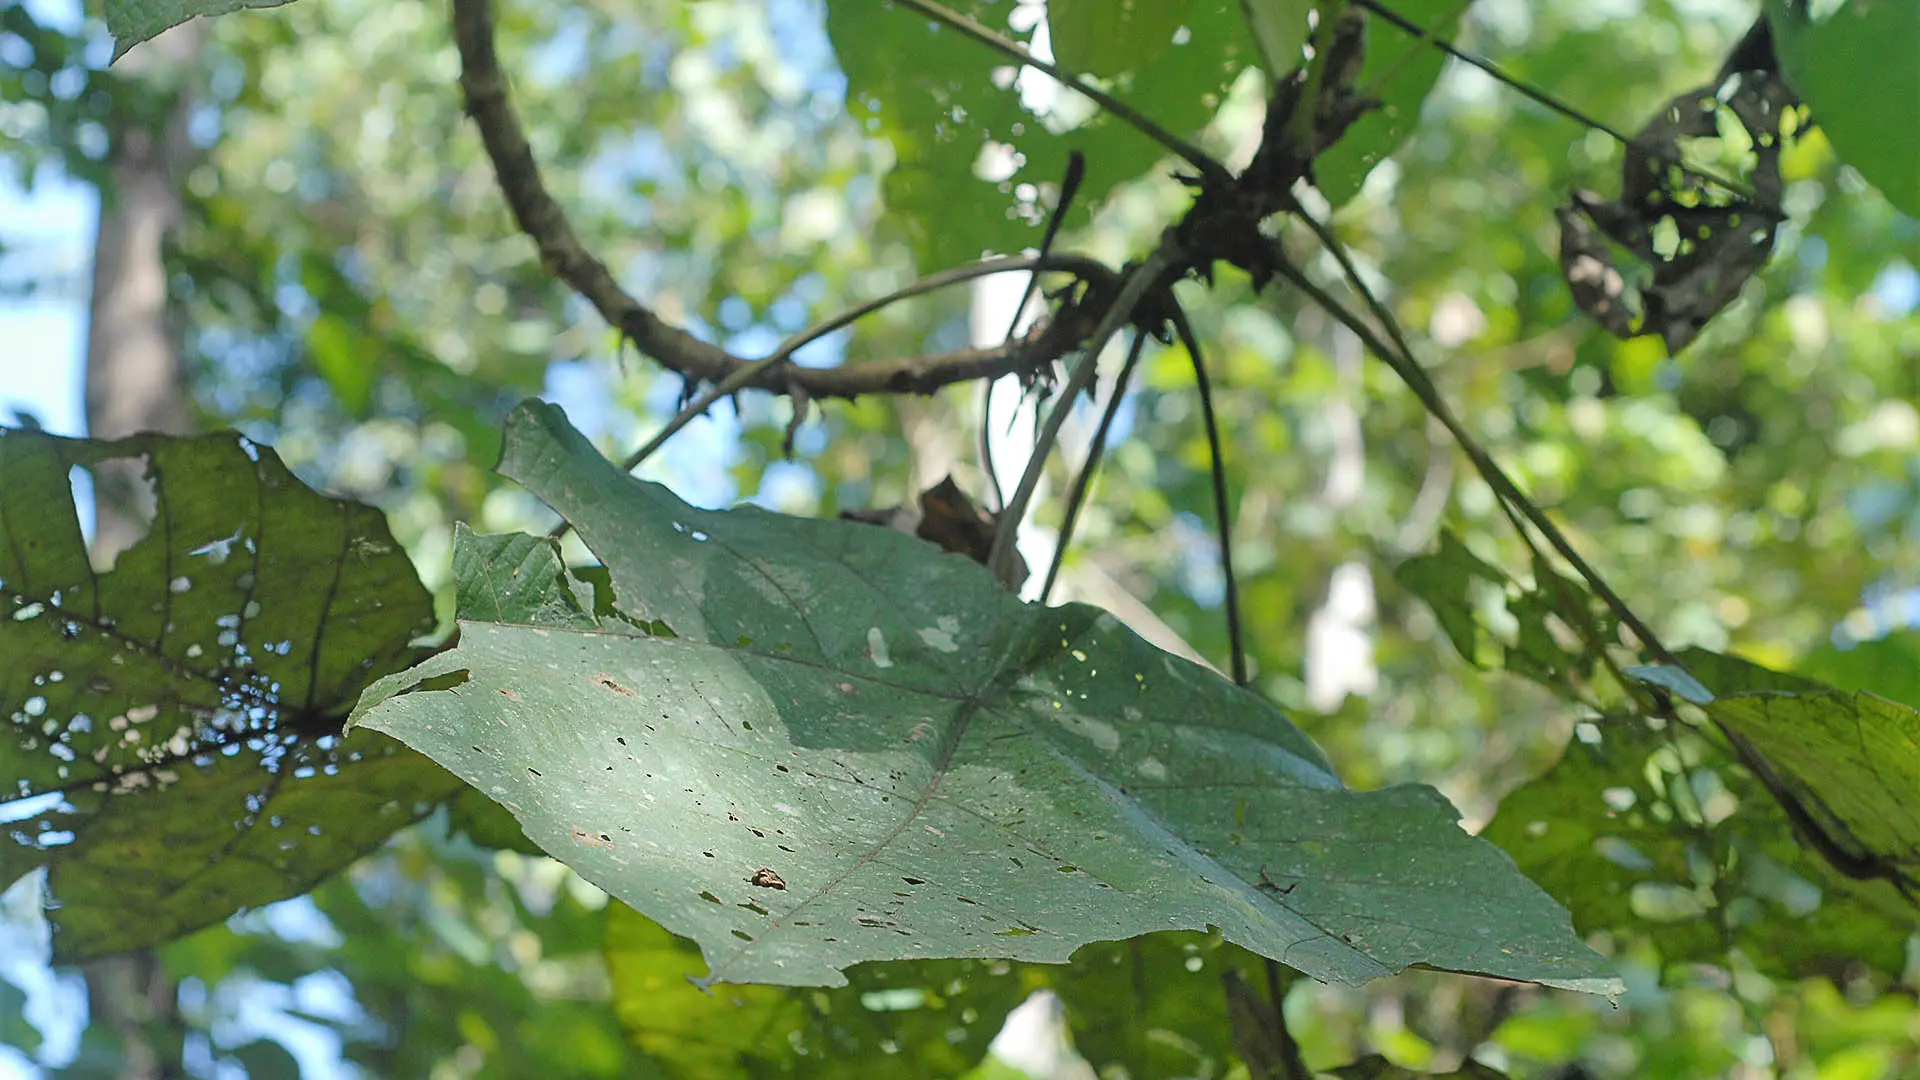 Broad, star shaped leaves grow on a vine. They have holes which could be evidence of an insect. 